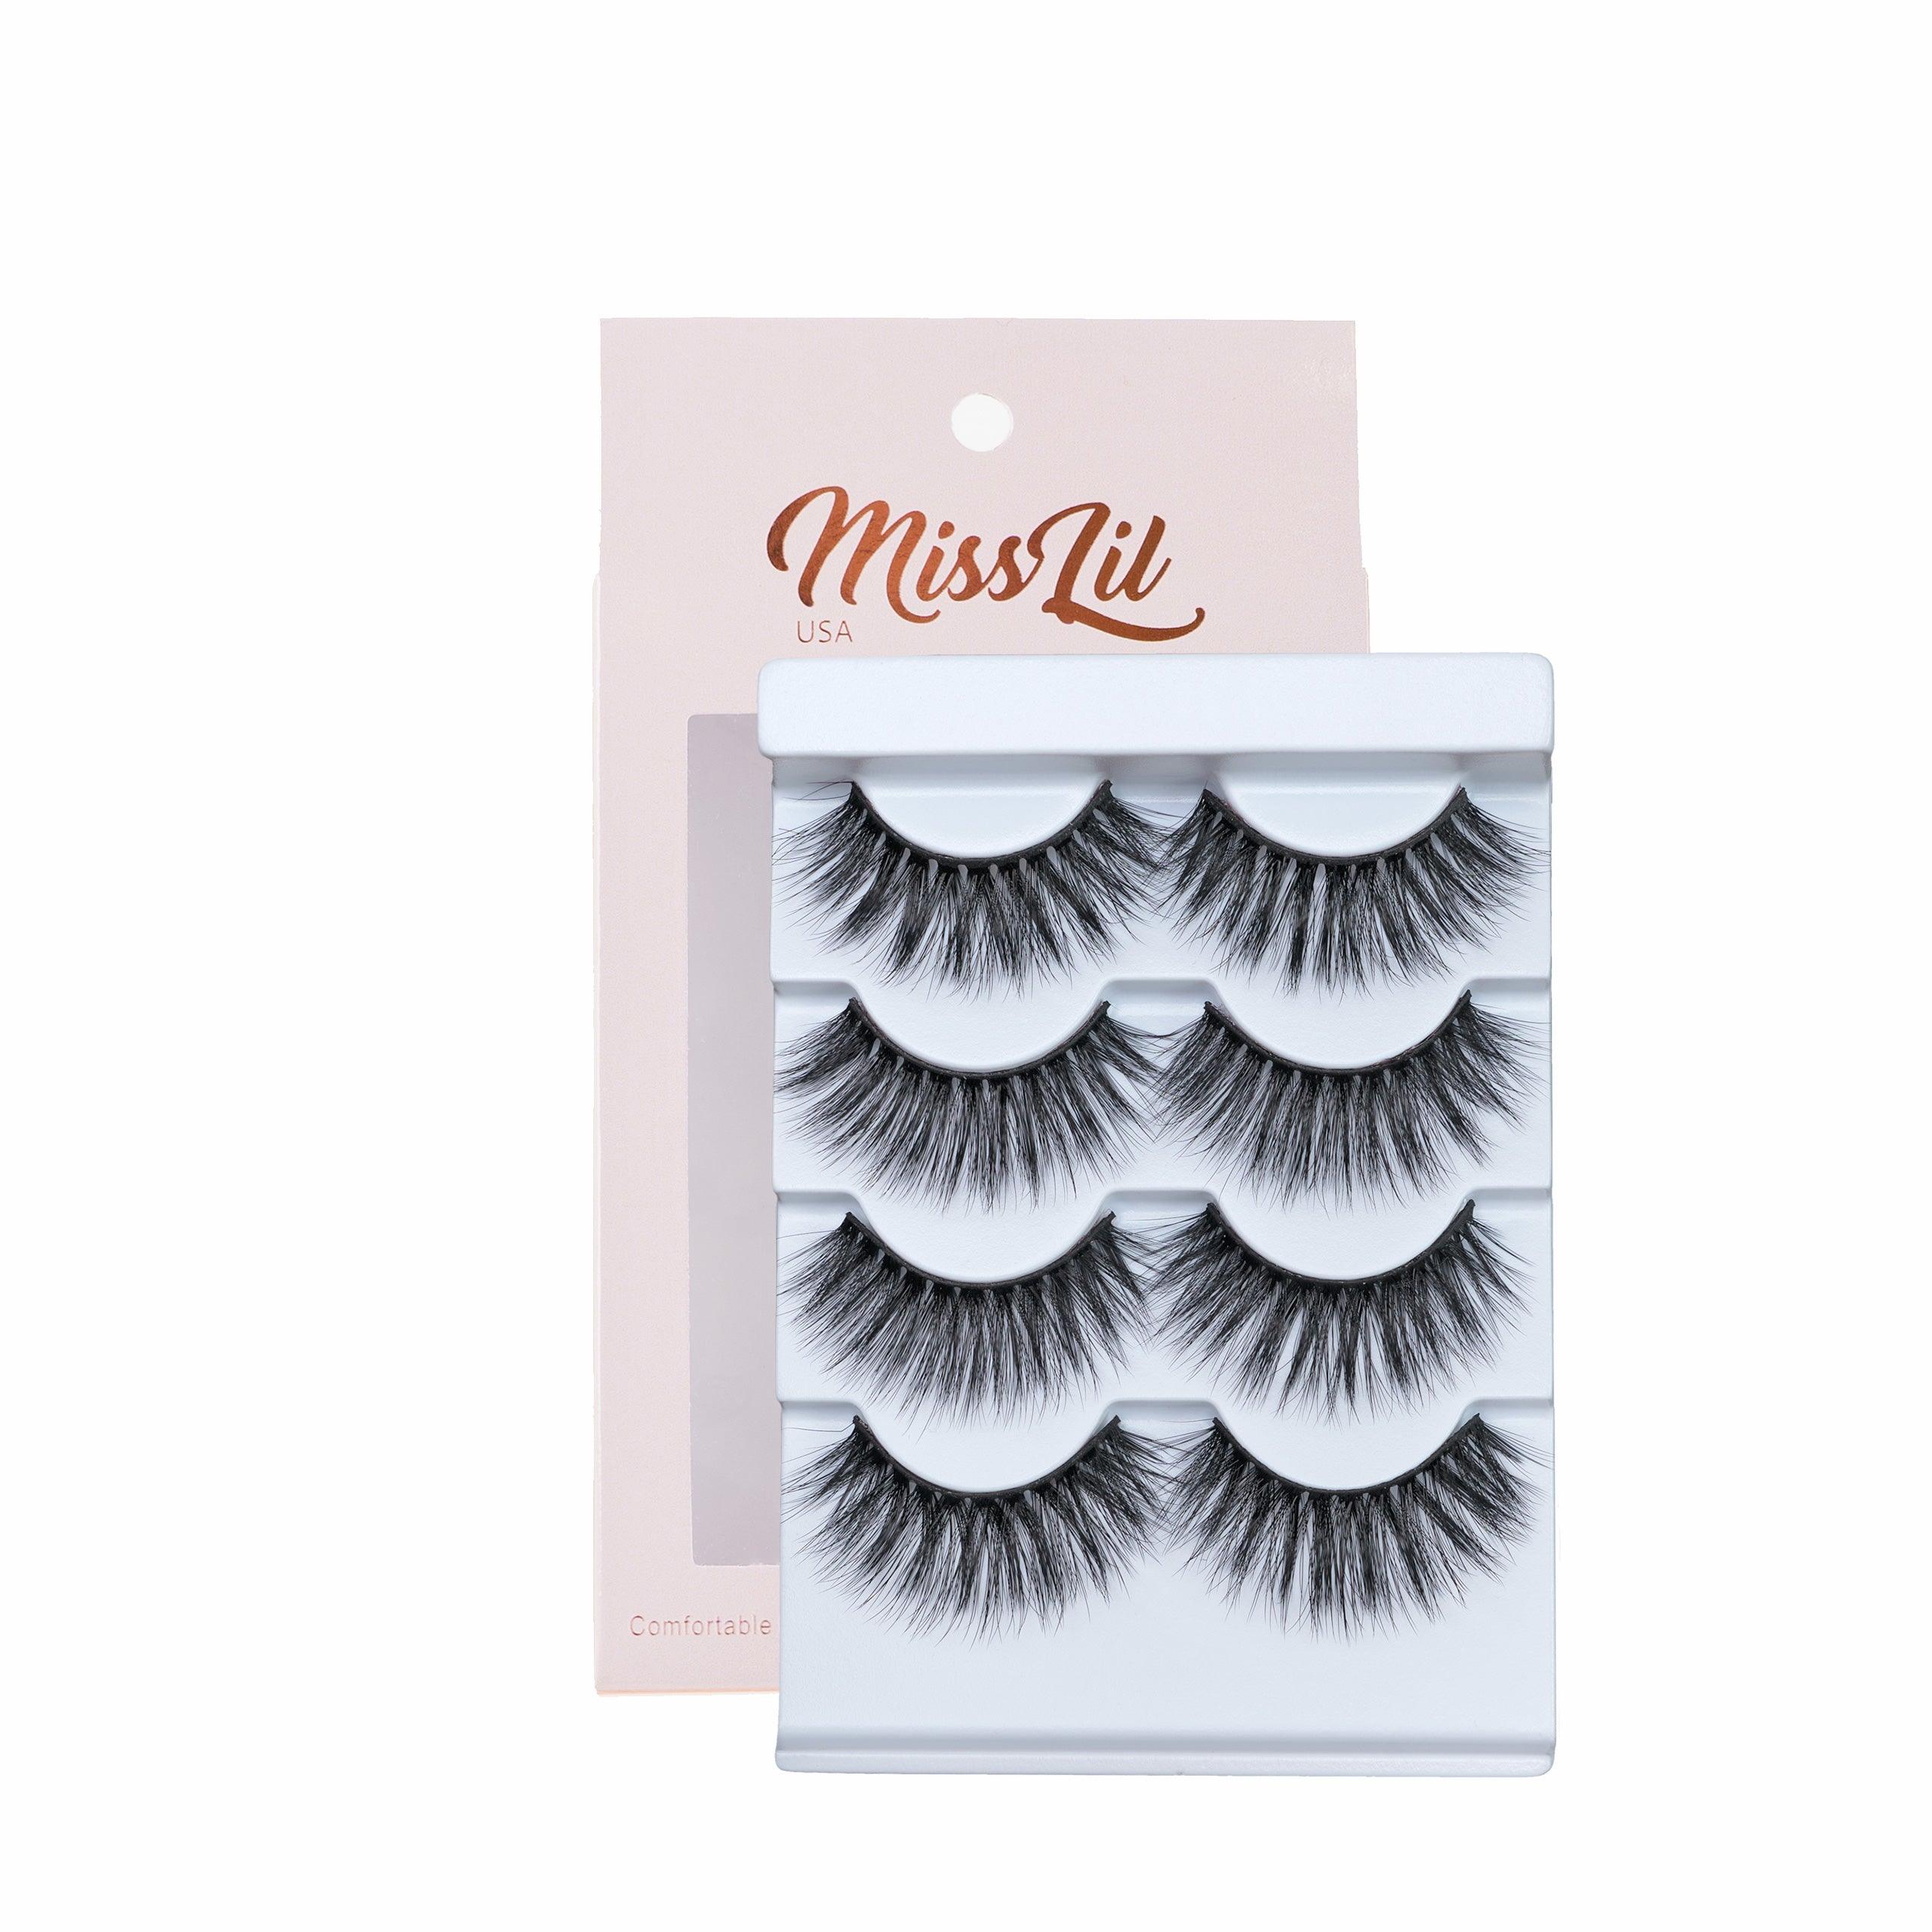 4 Pairs Lashes - Classic Collection #28 - Miss Lil USA